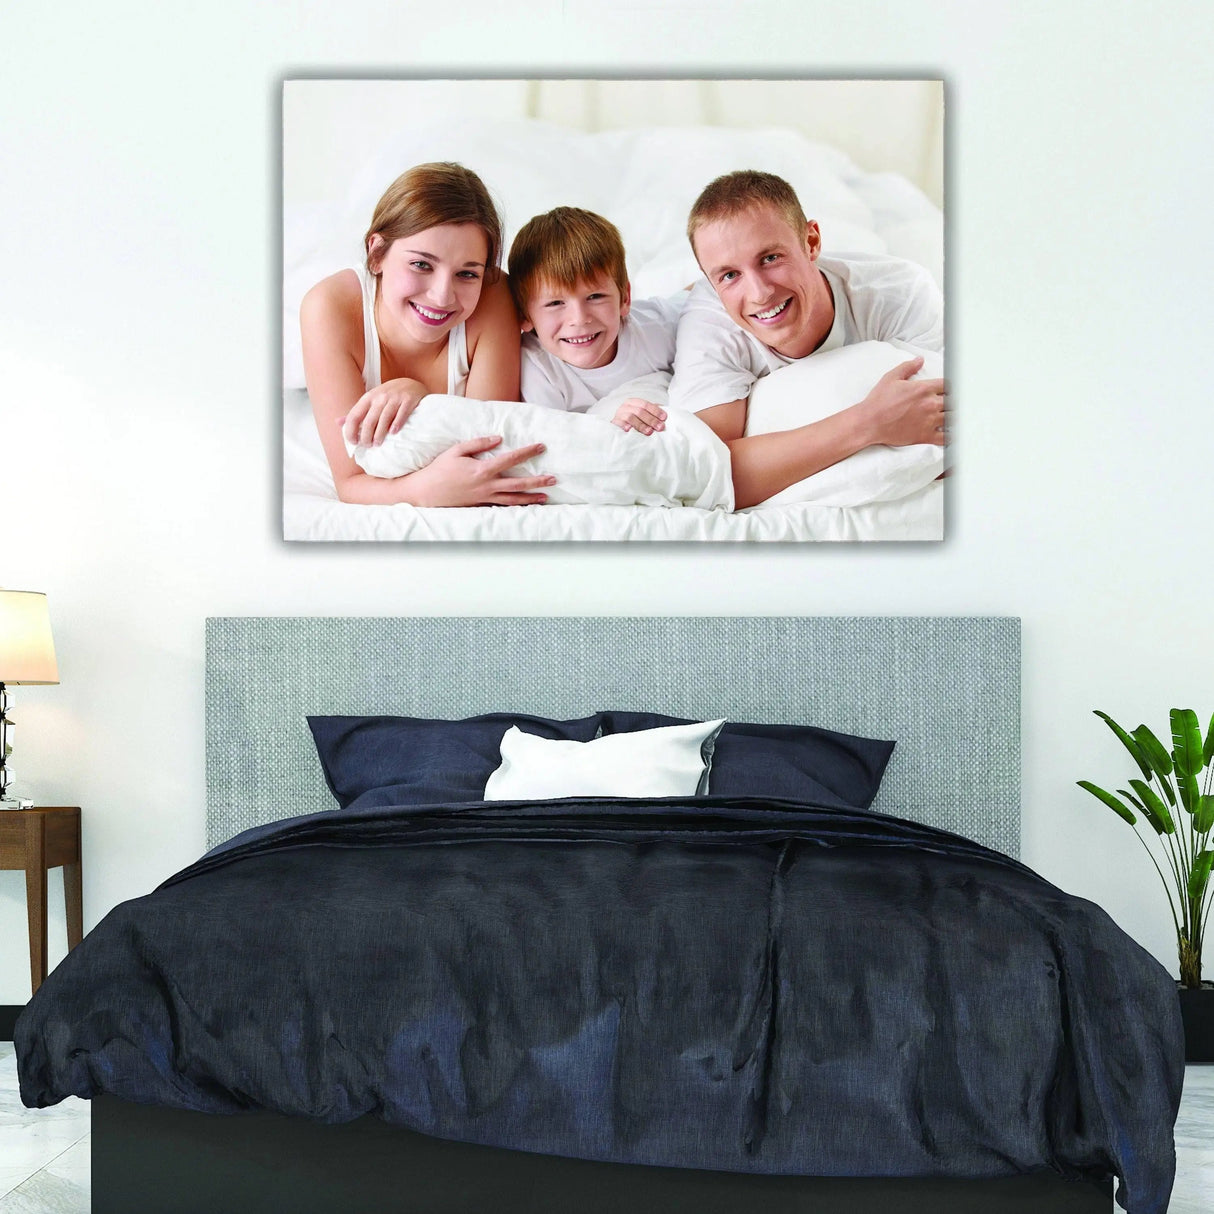 Canvas Print With Your Photo - Custom Personalized Wall Picture Art Service - Customized Customize Portrait Gift From Foto Printed On For To - Decords